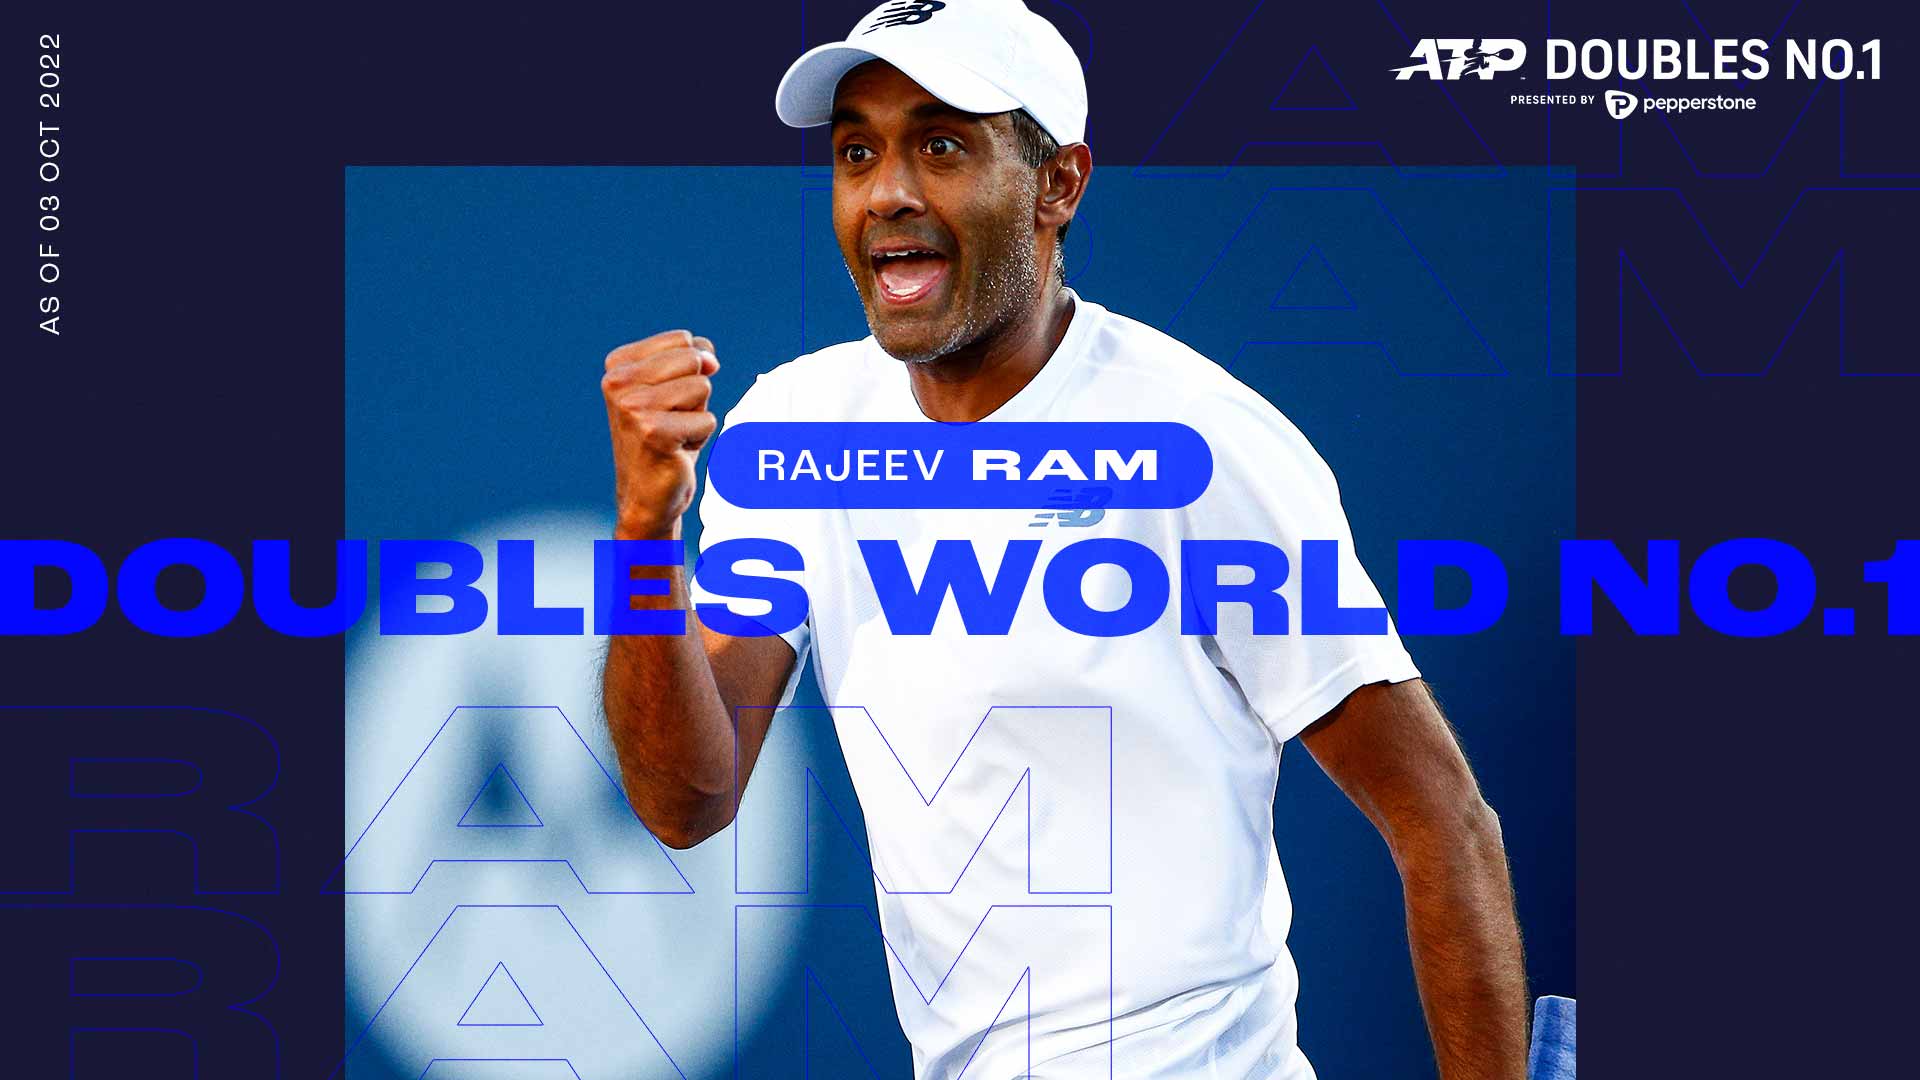 Team-Minded Rajeev Ram Climbs To Doubles World No